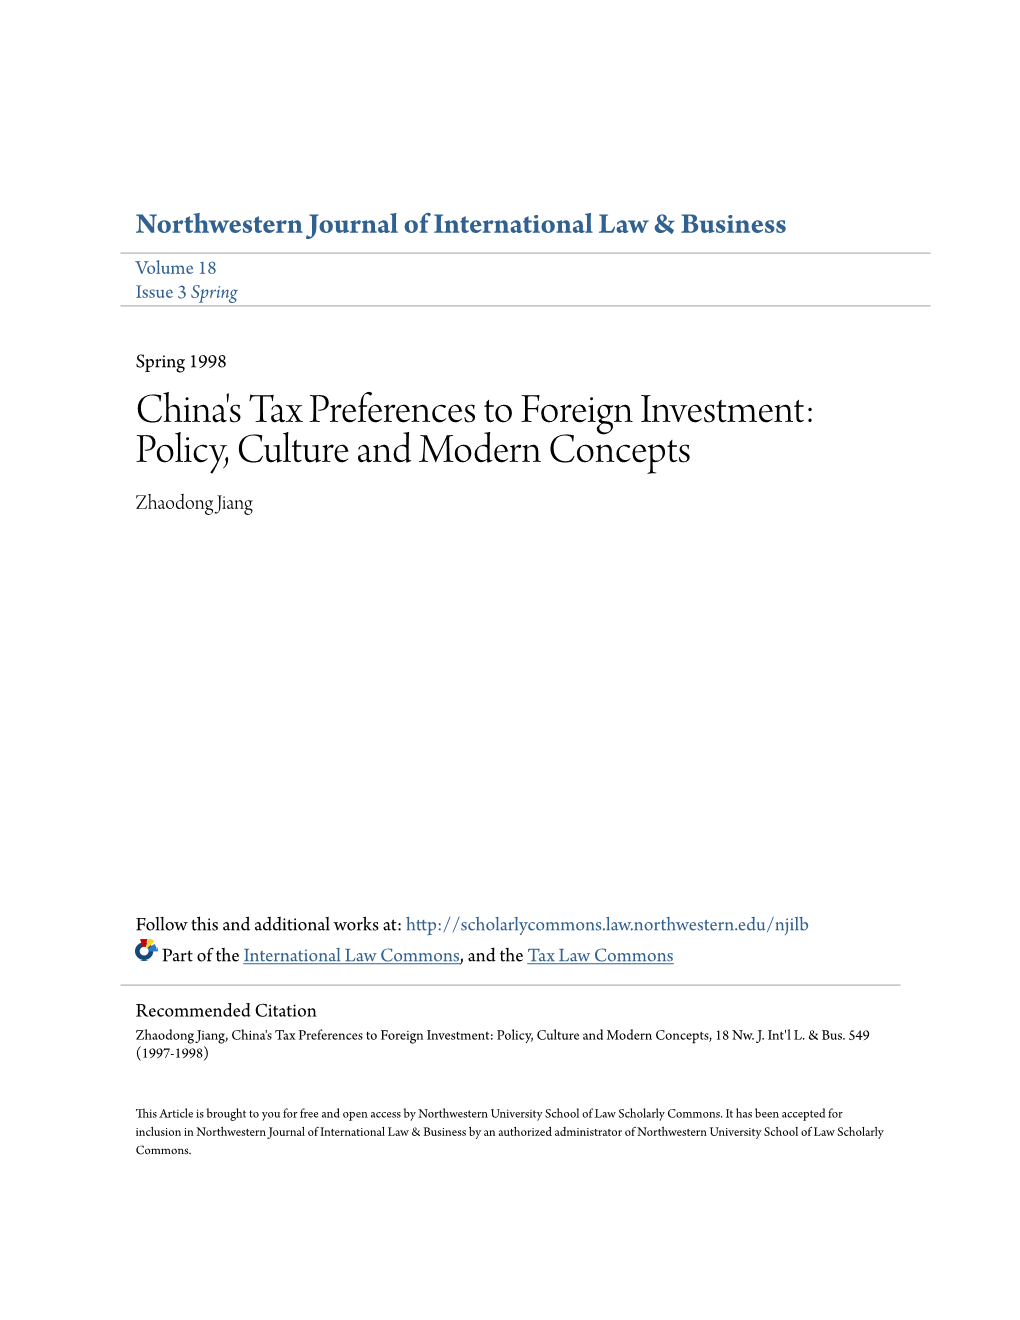 China's Tax Preferences to Foreign Investment: Policy, Culture and Modern Concepts Zhaodong Jiang